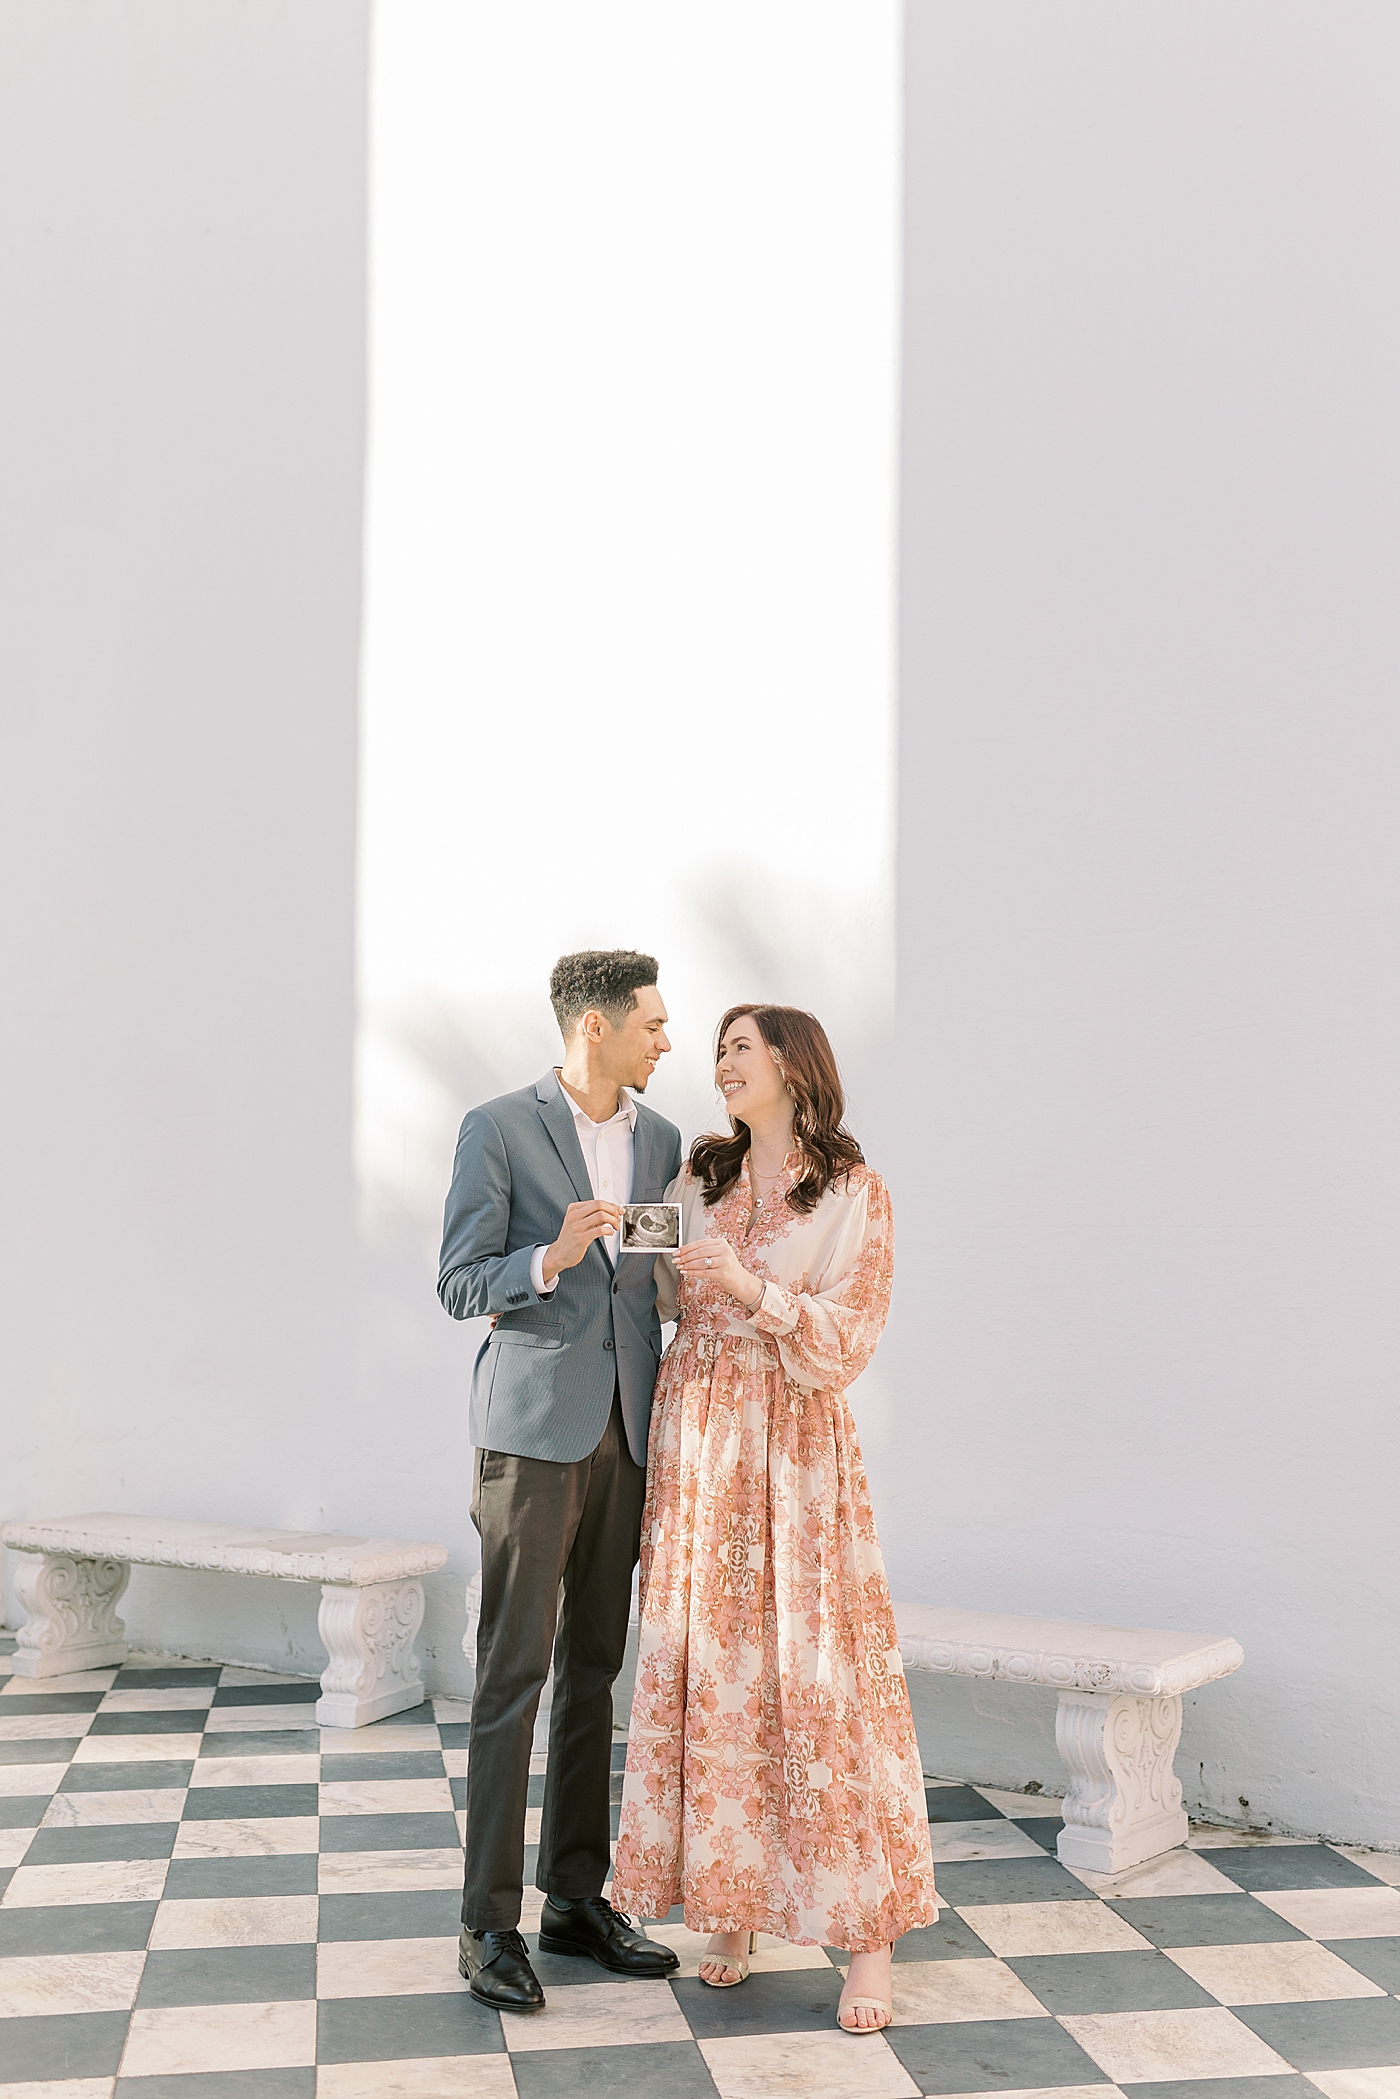 Mom and dad to be standing on checkered floor smiling at each other | Photo by Caitlyn Motycka Photography